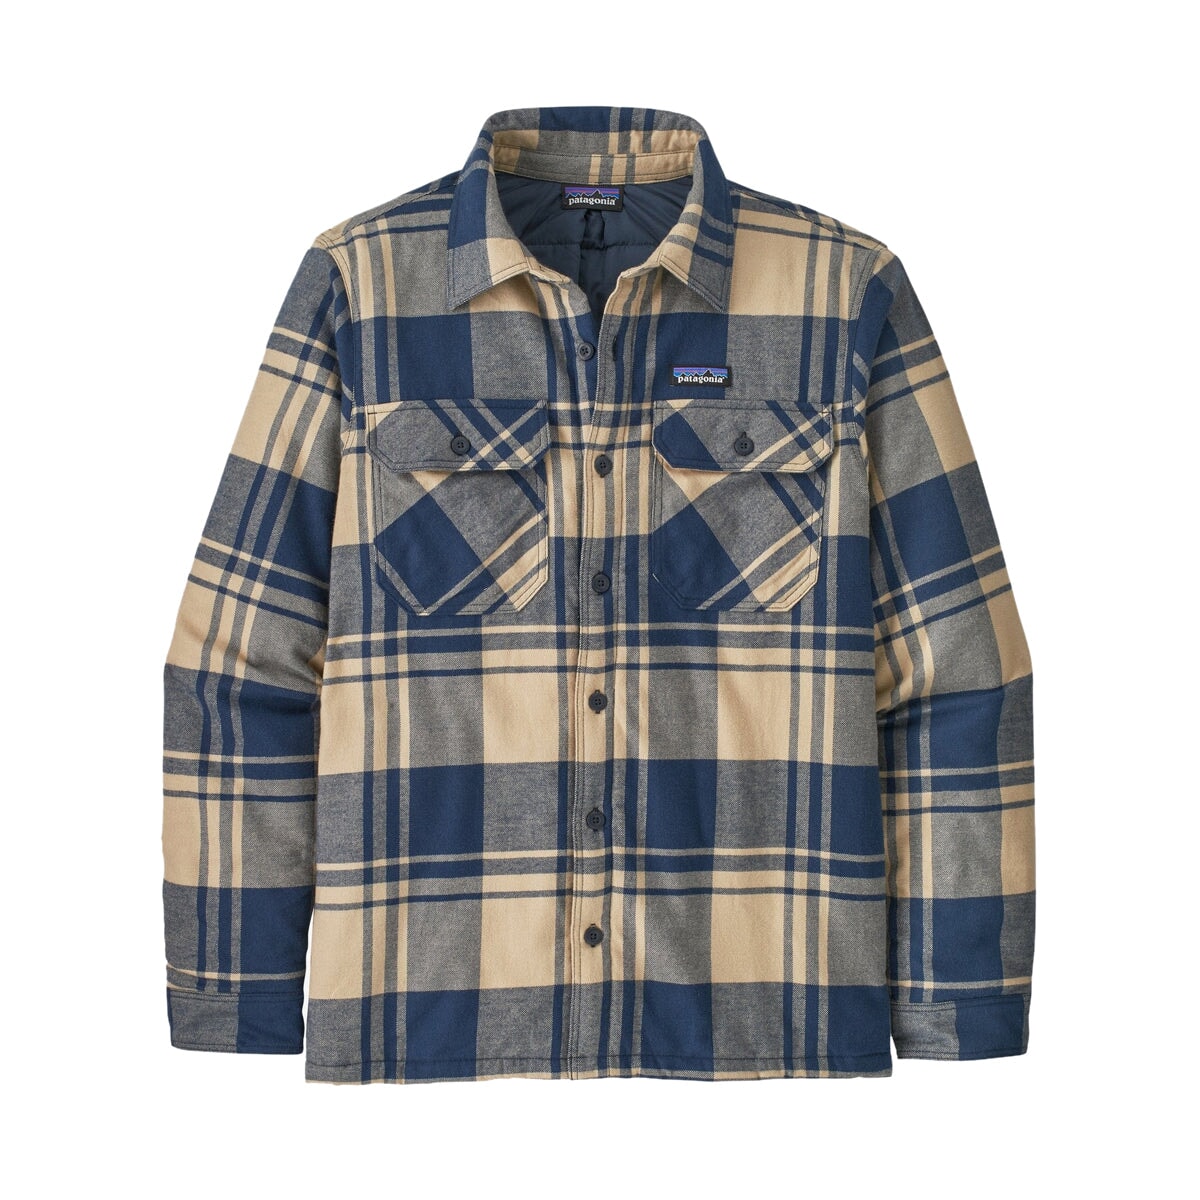 Patagonia Men's Insulated Organic Cotton Midweight Fjord Flannel Shirt - Live Oak: Oar Tan Jacke Patagonia 